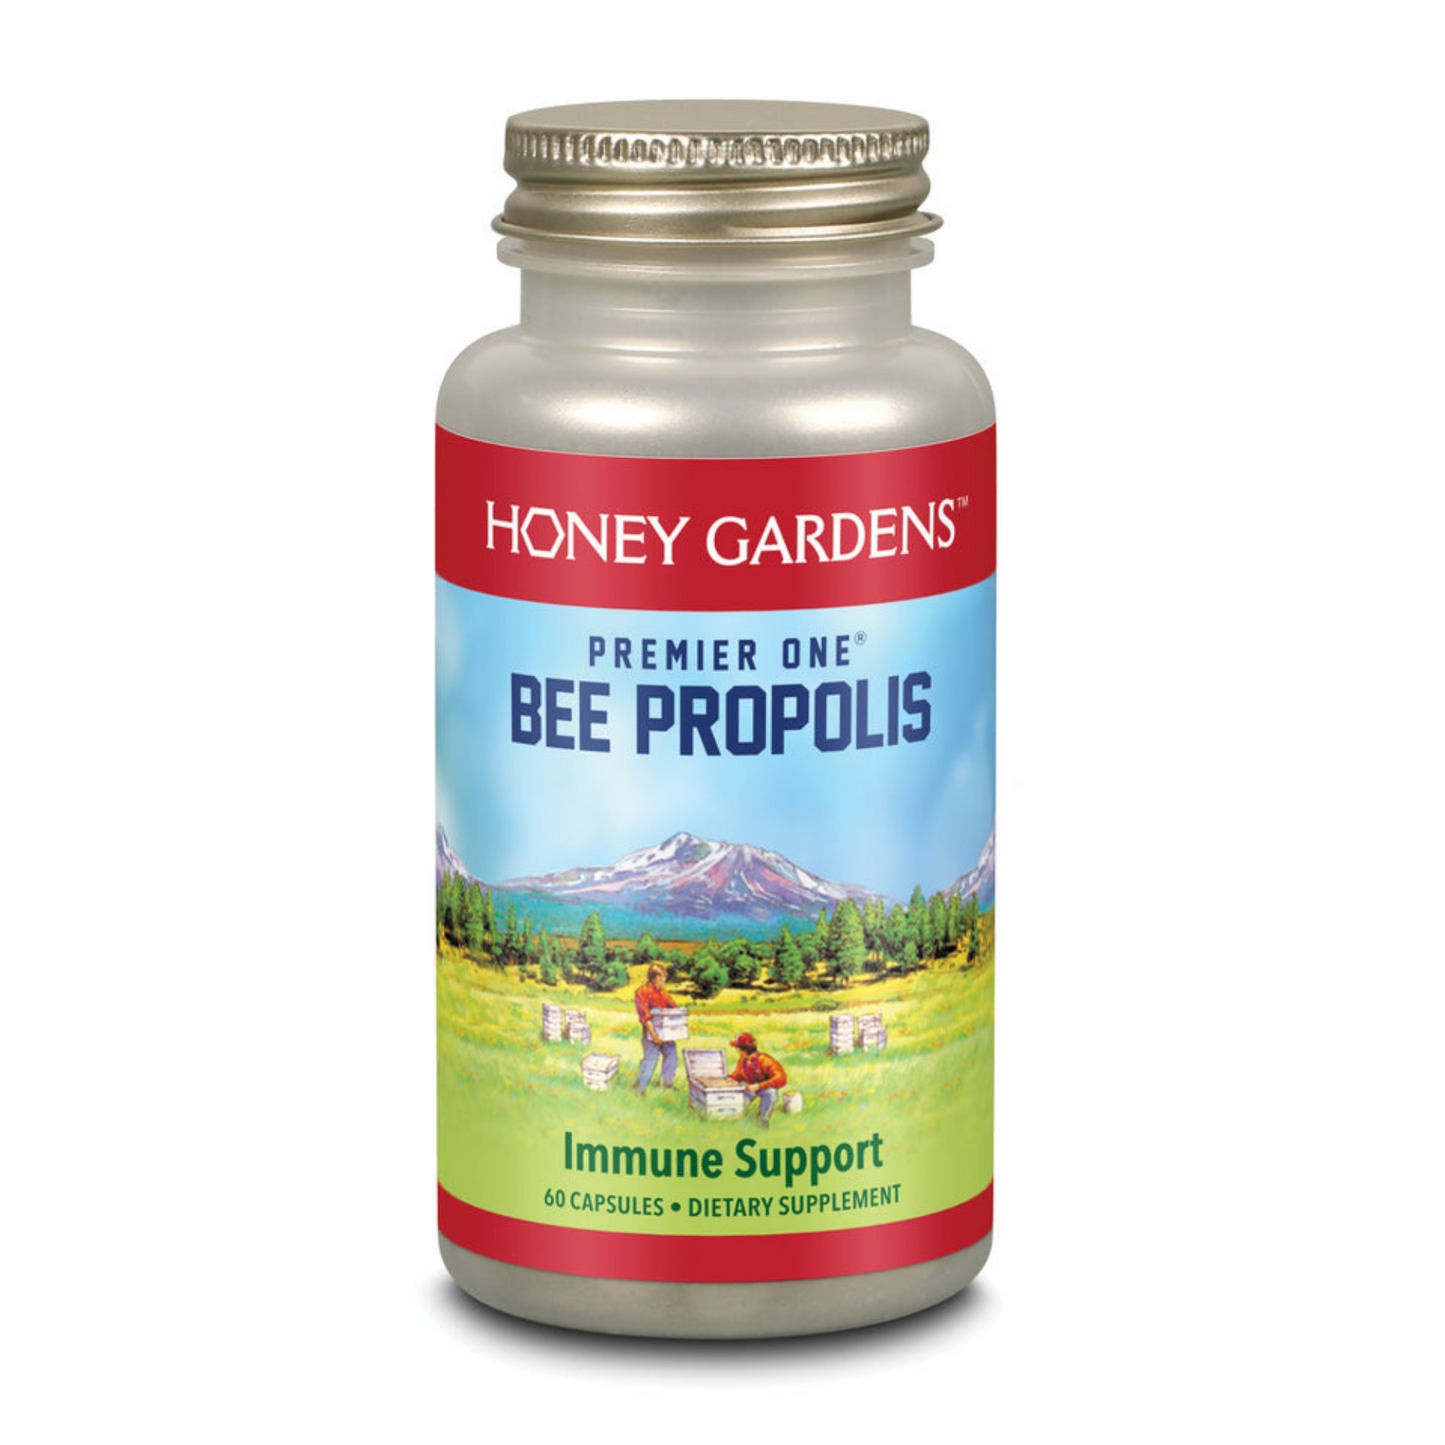 Primary image of Bee Propolis